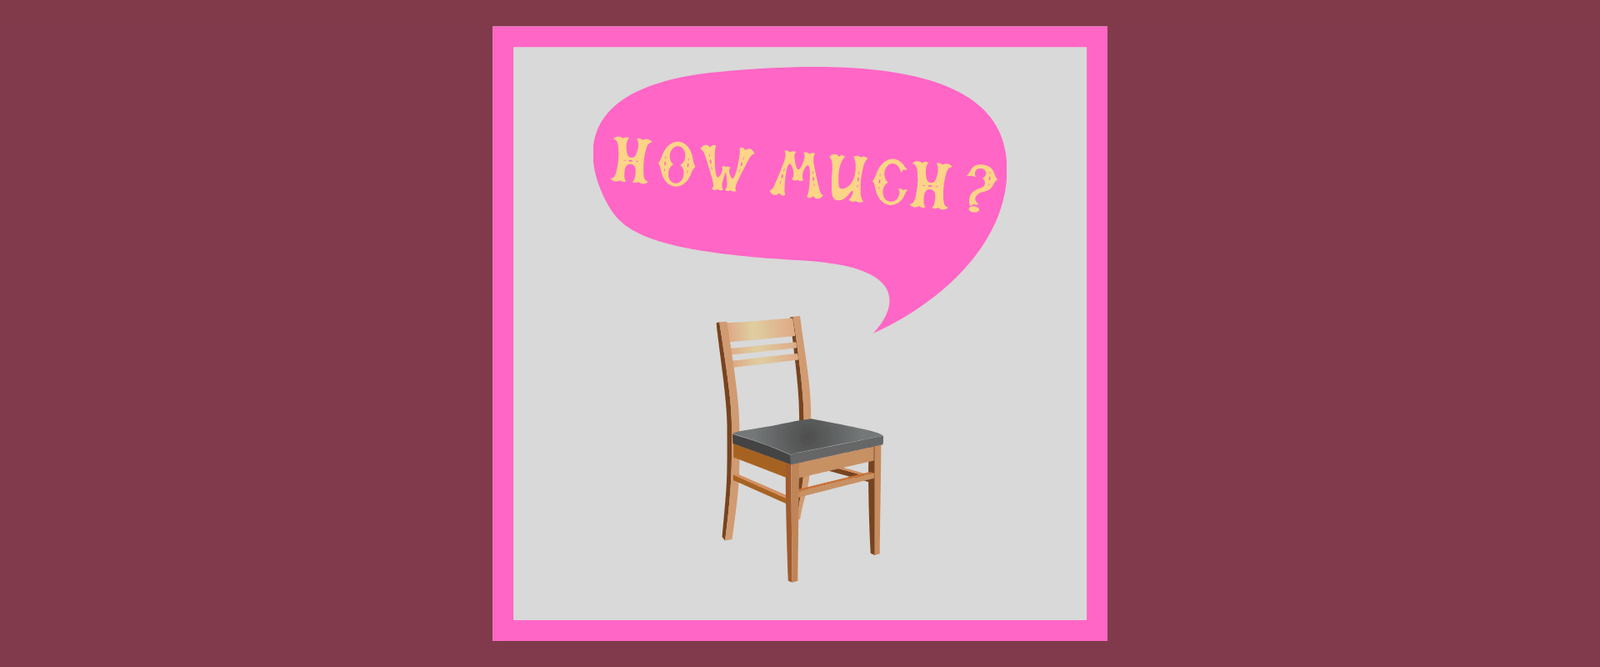 How much are Bathroom Chairs?